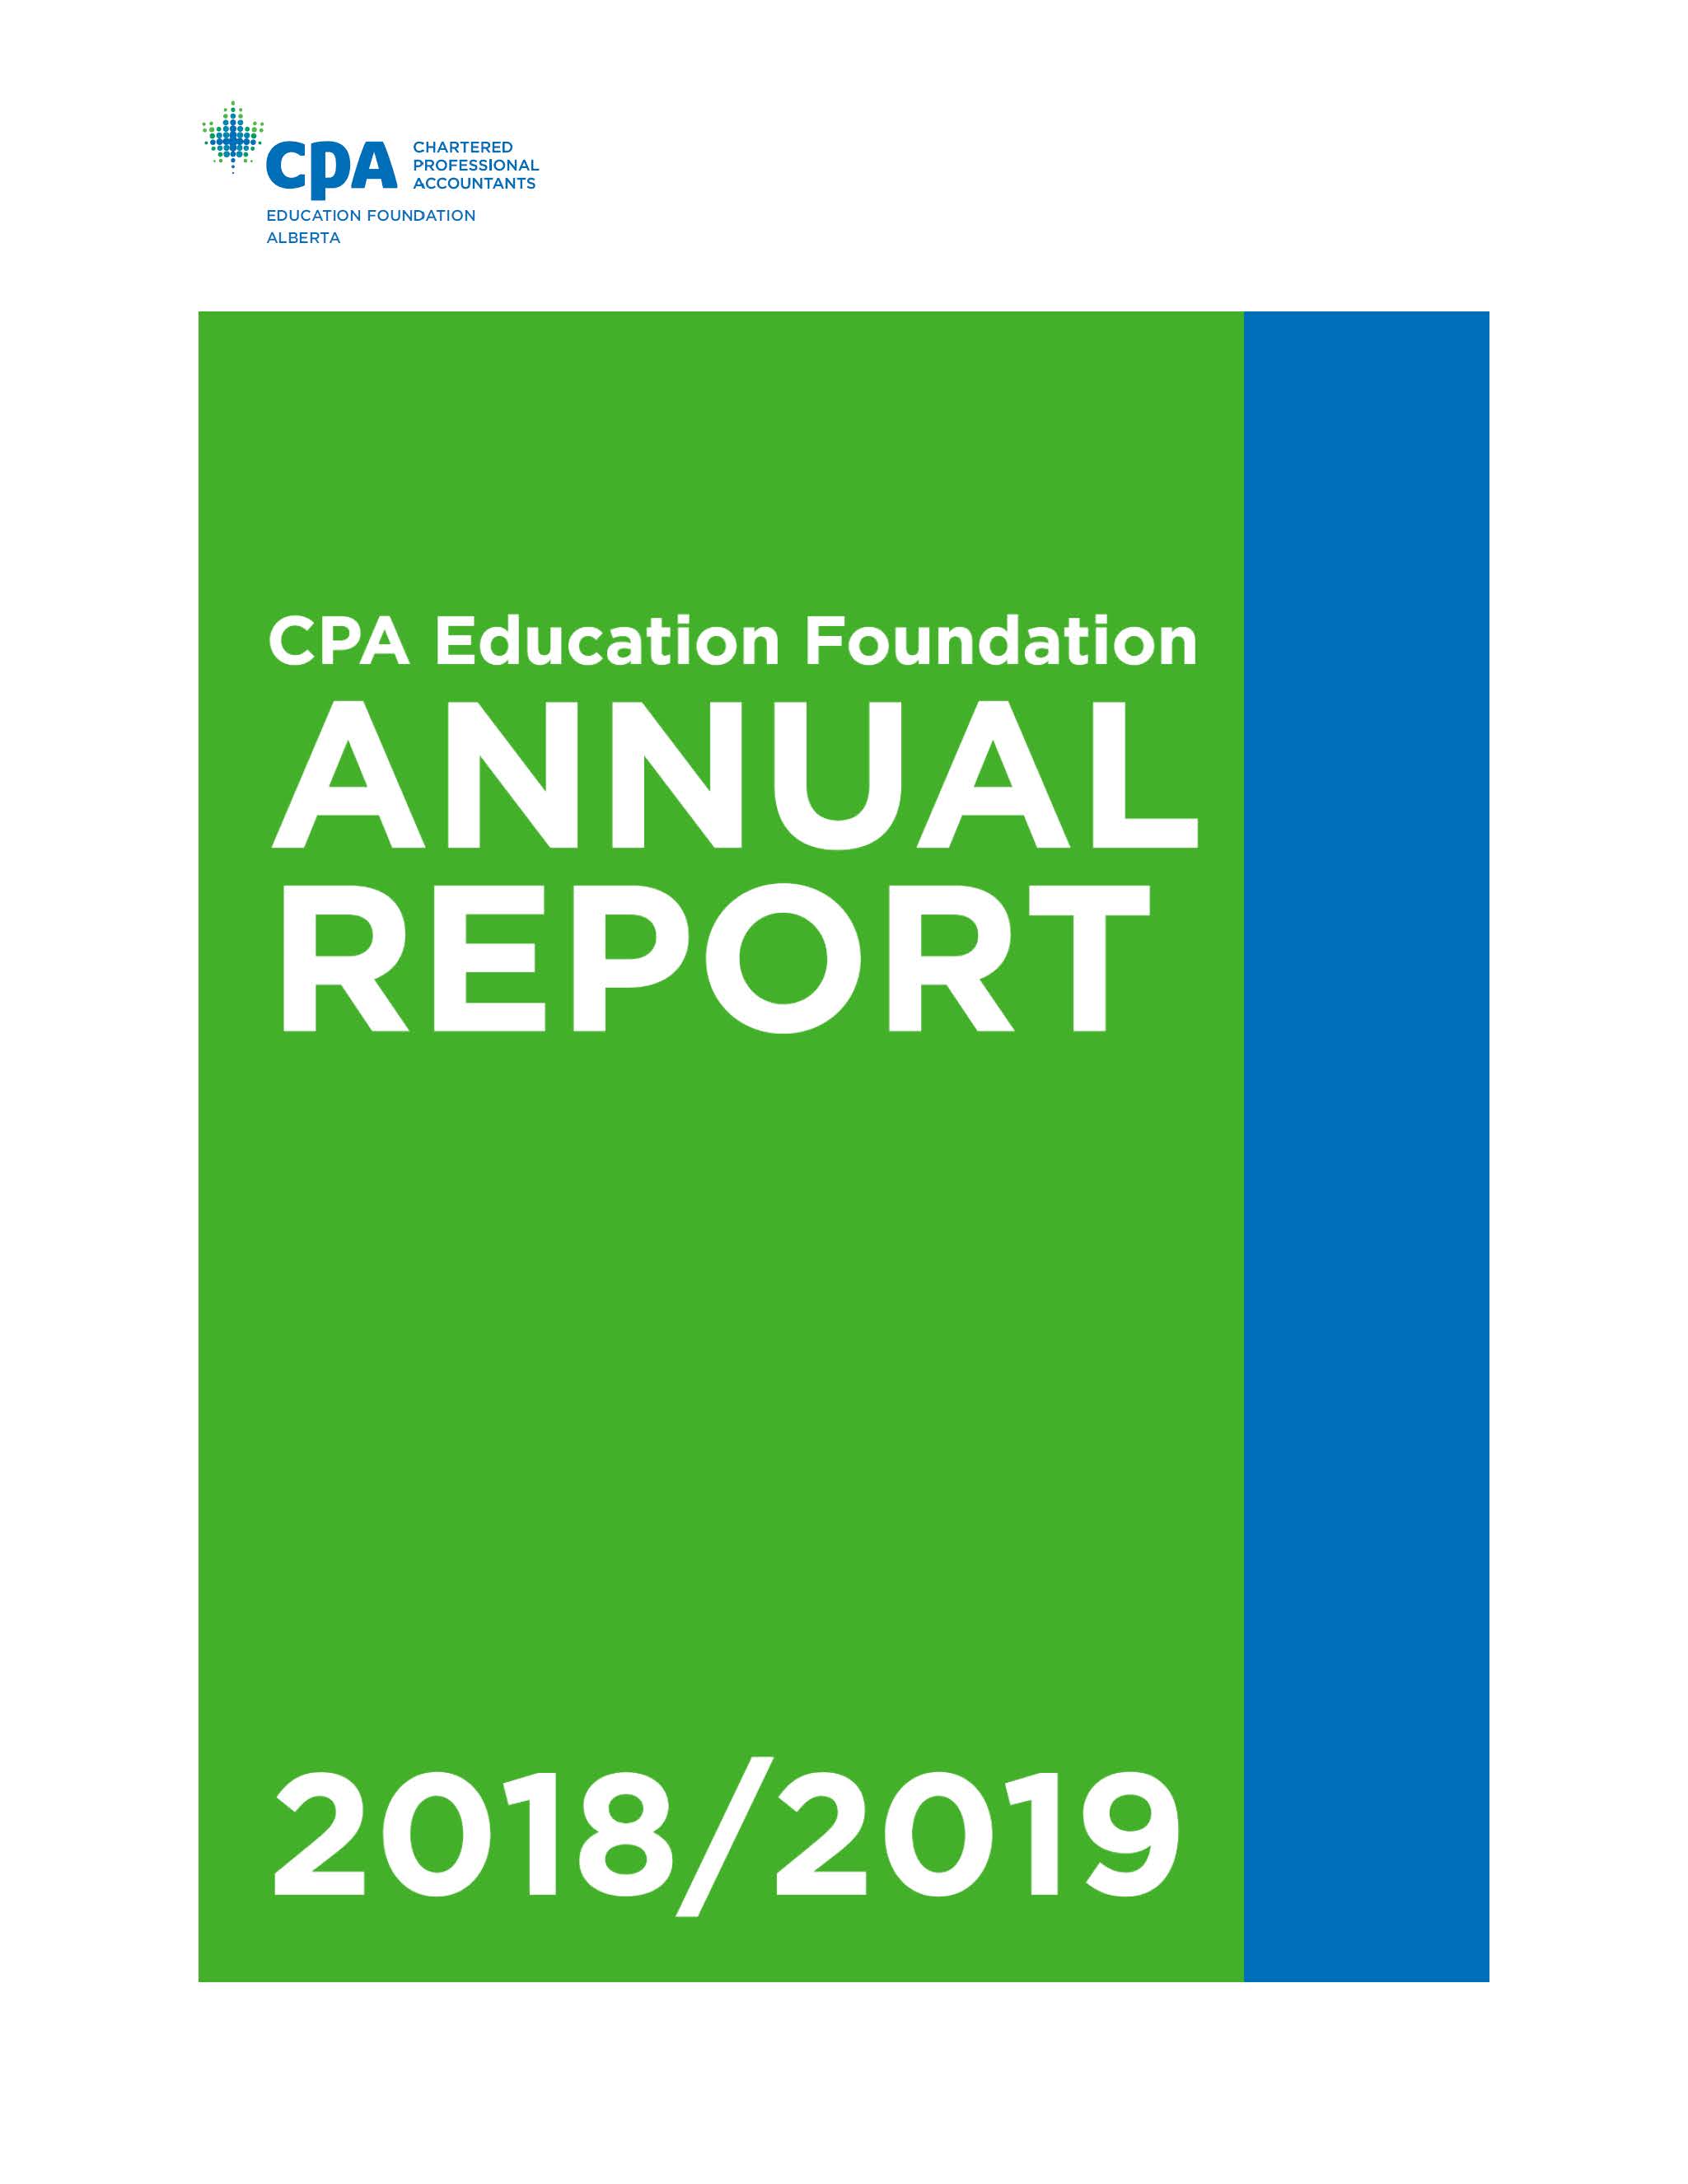 CPA Education Foundation Annual Report 2018-2019